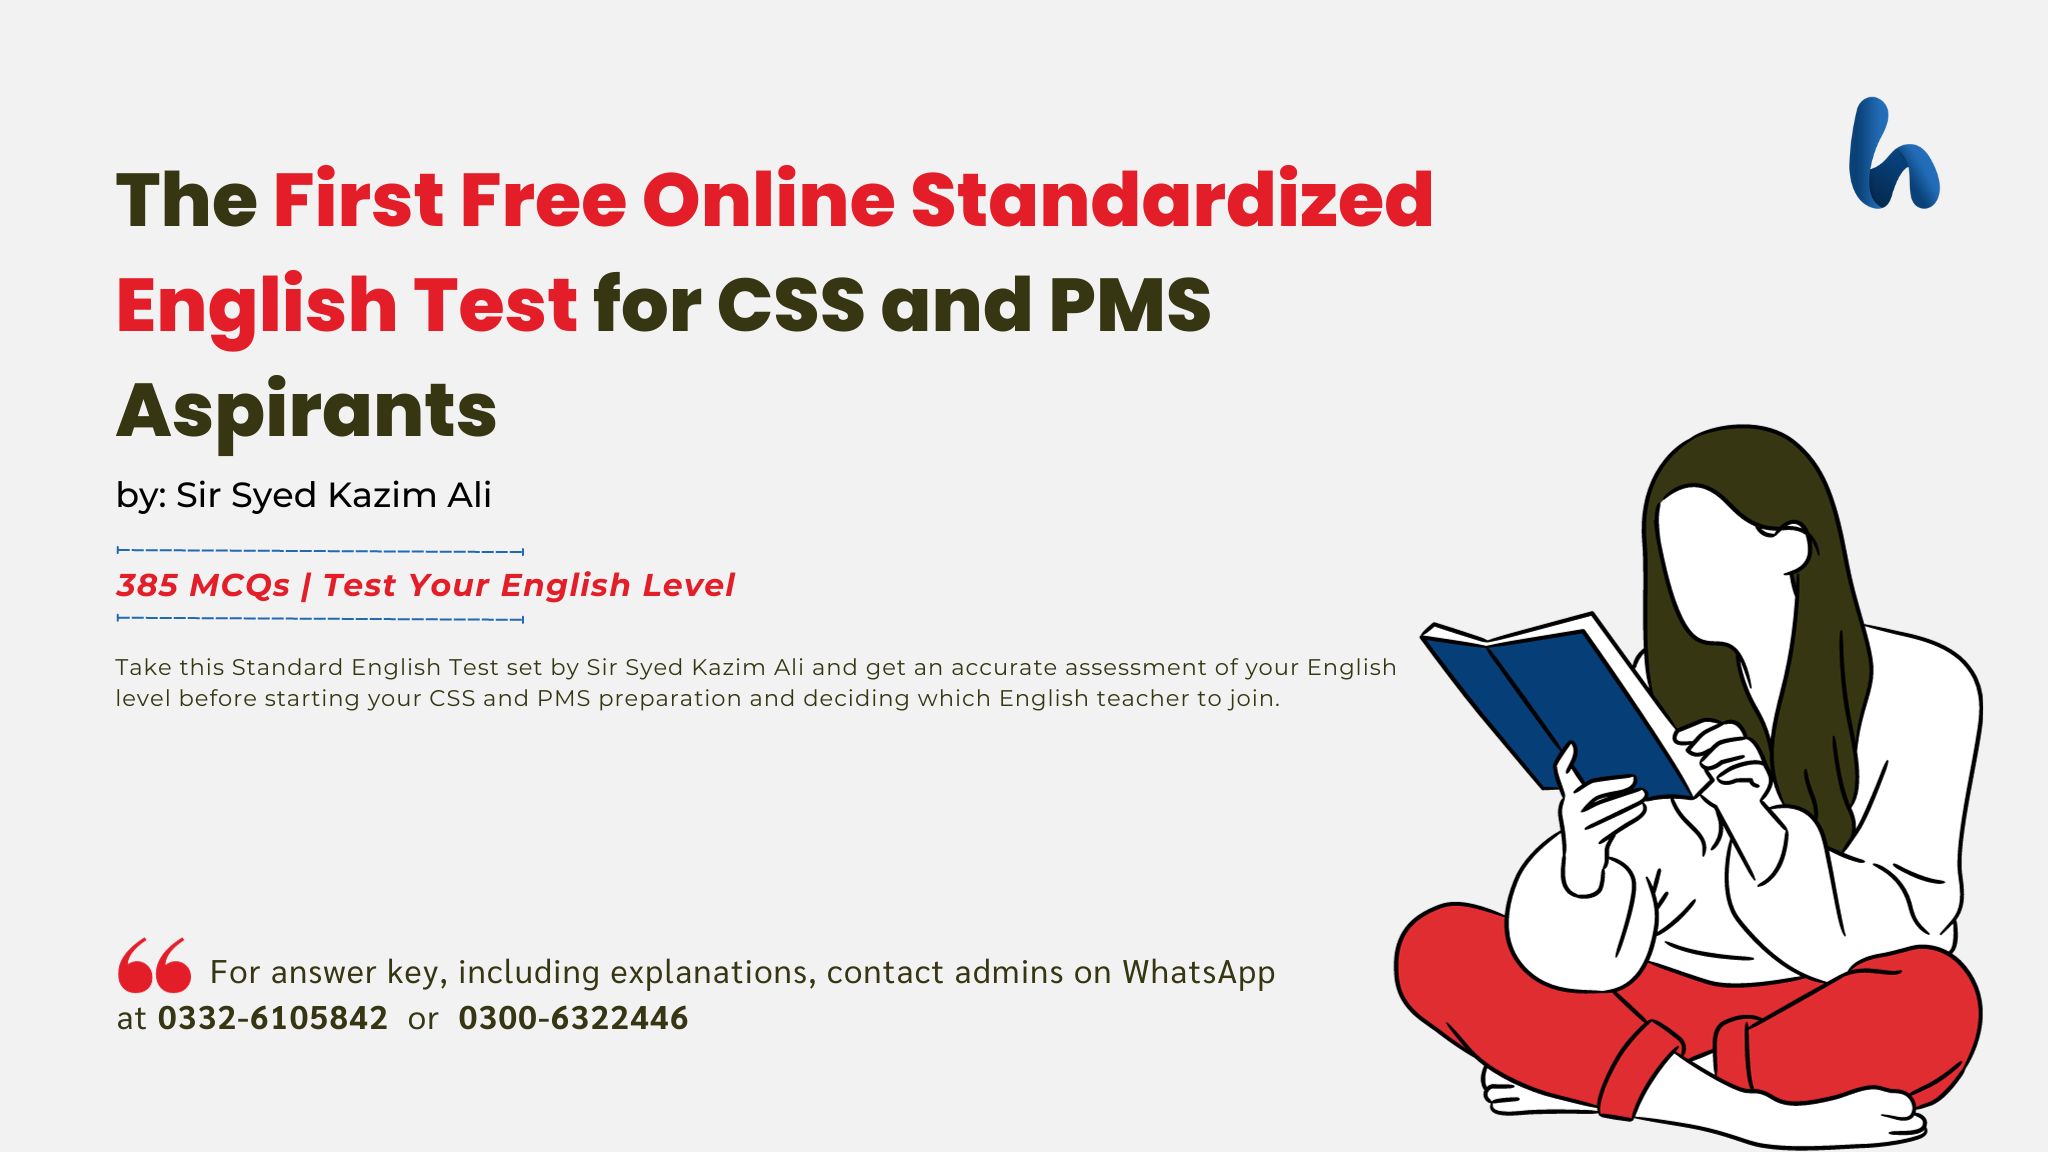 The First Free Online Standardized English Test for CSS and PMS Aspirants